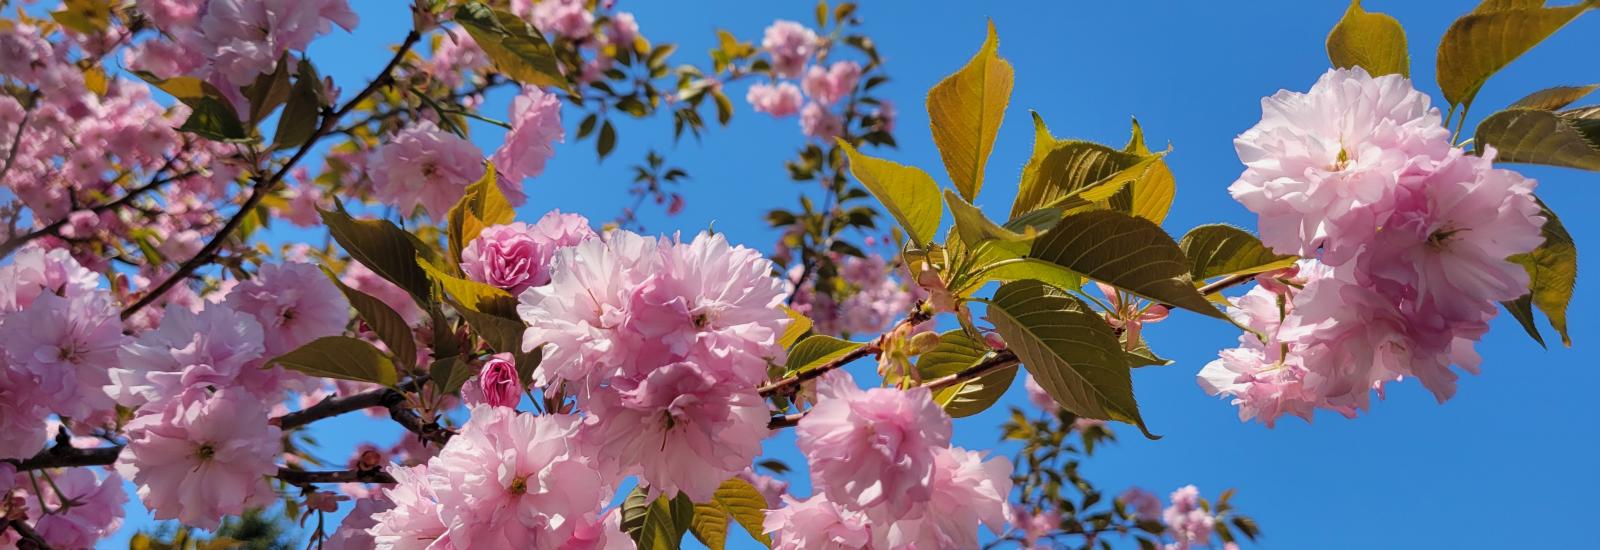 Image of tree branch with pink blossoms and blue sky